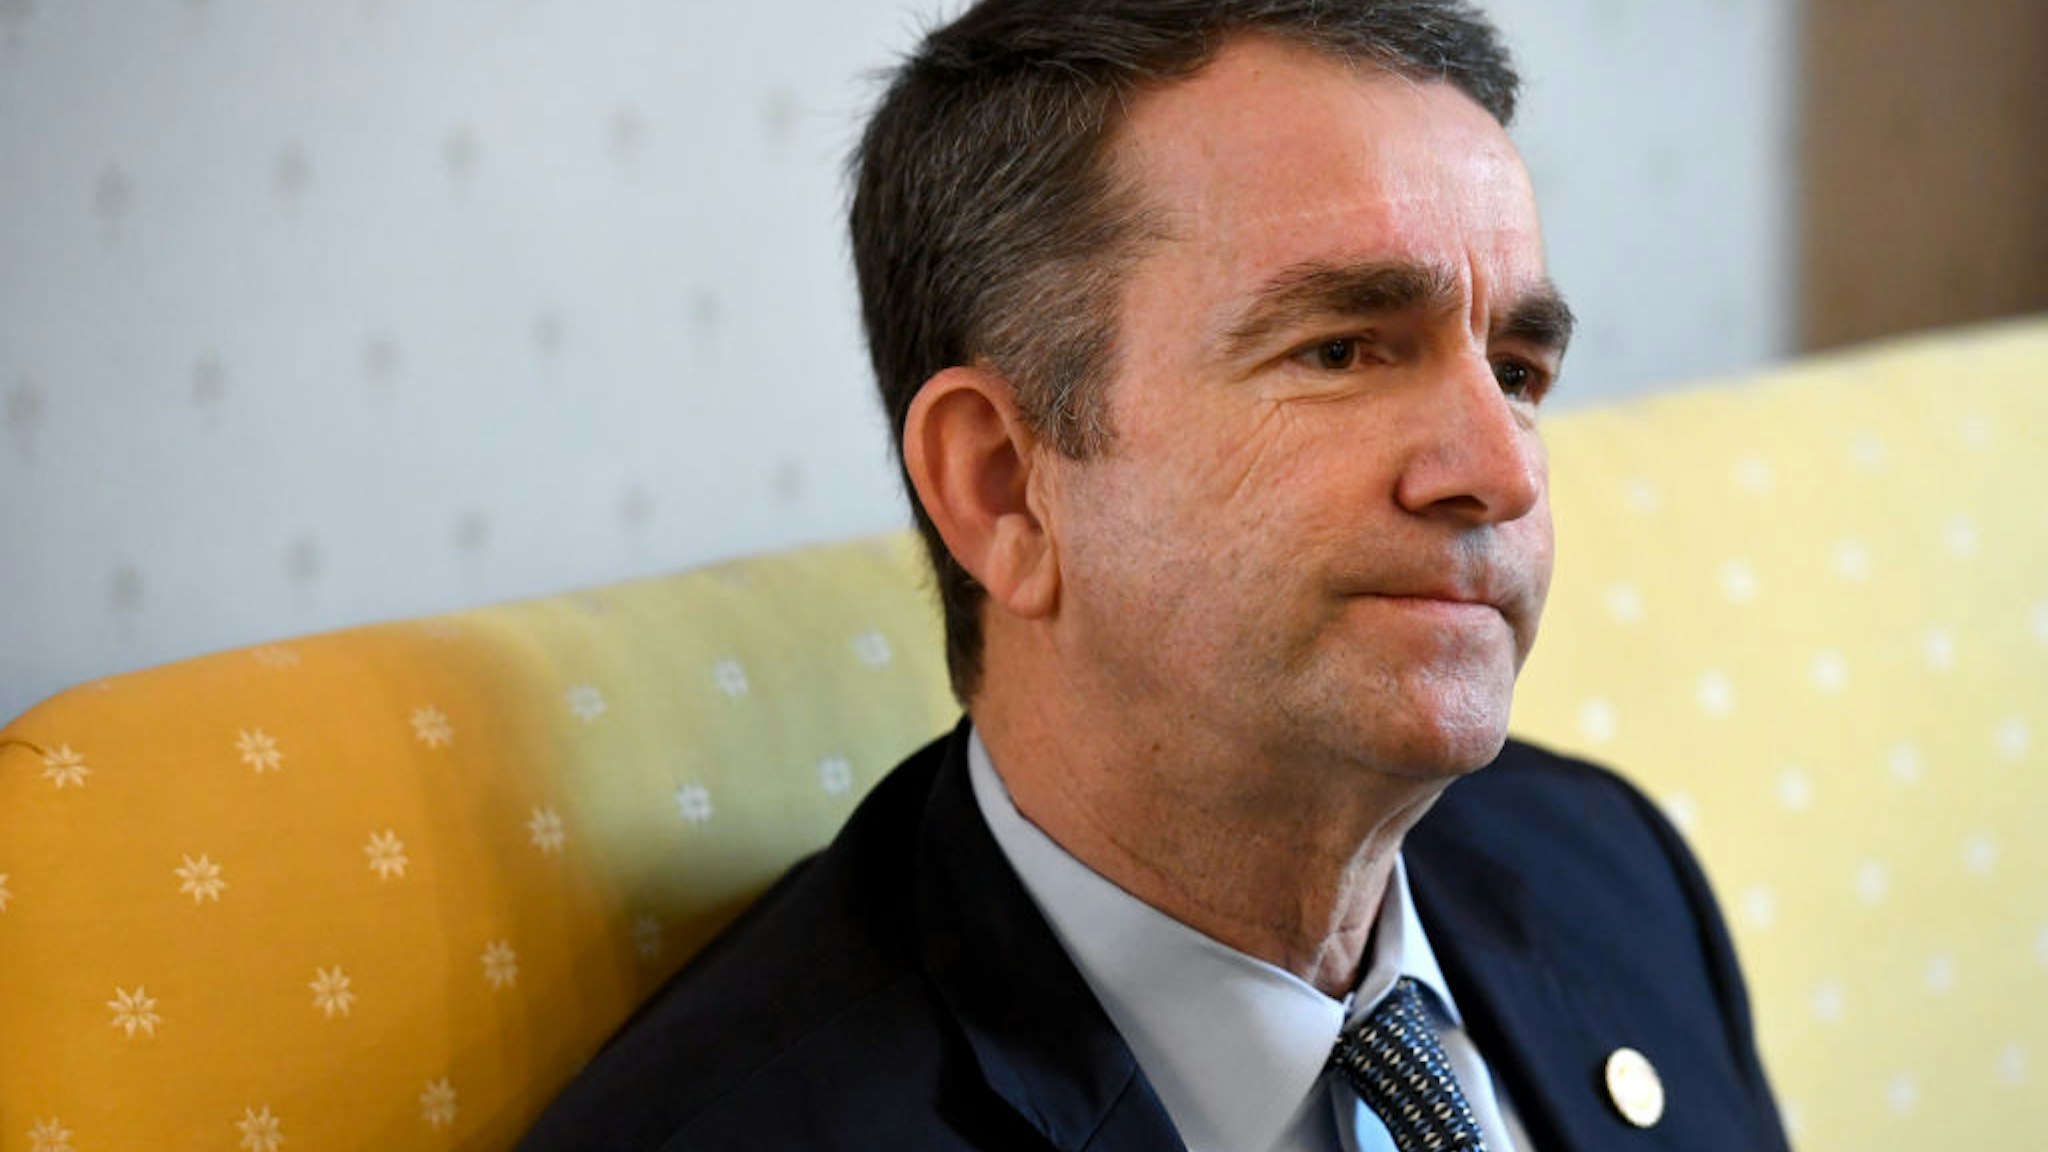 Virginia Gov. Ralph Northam talks about how he was raised during an interview in the Governor's Mansion February 09, 2019 in Richmond, VA.